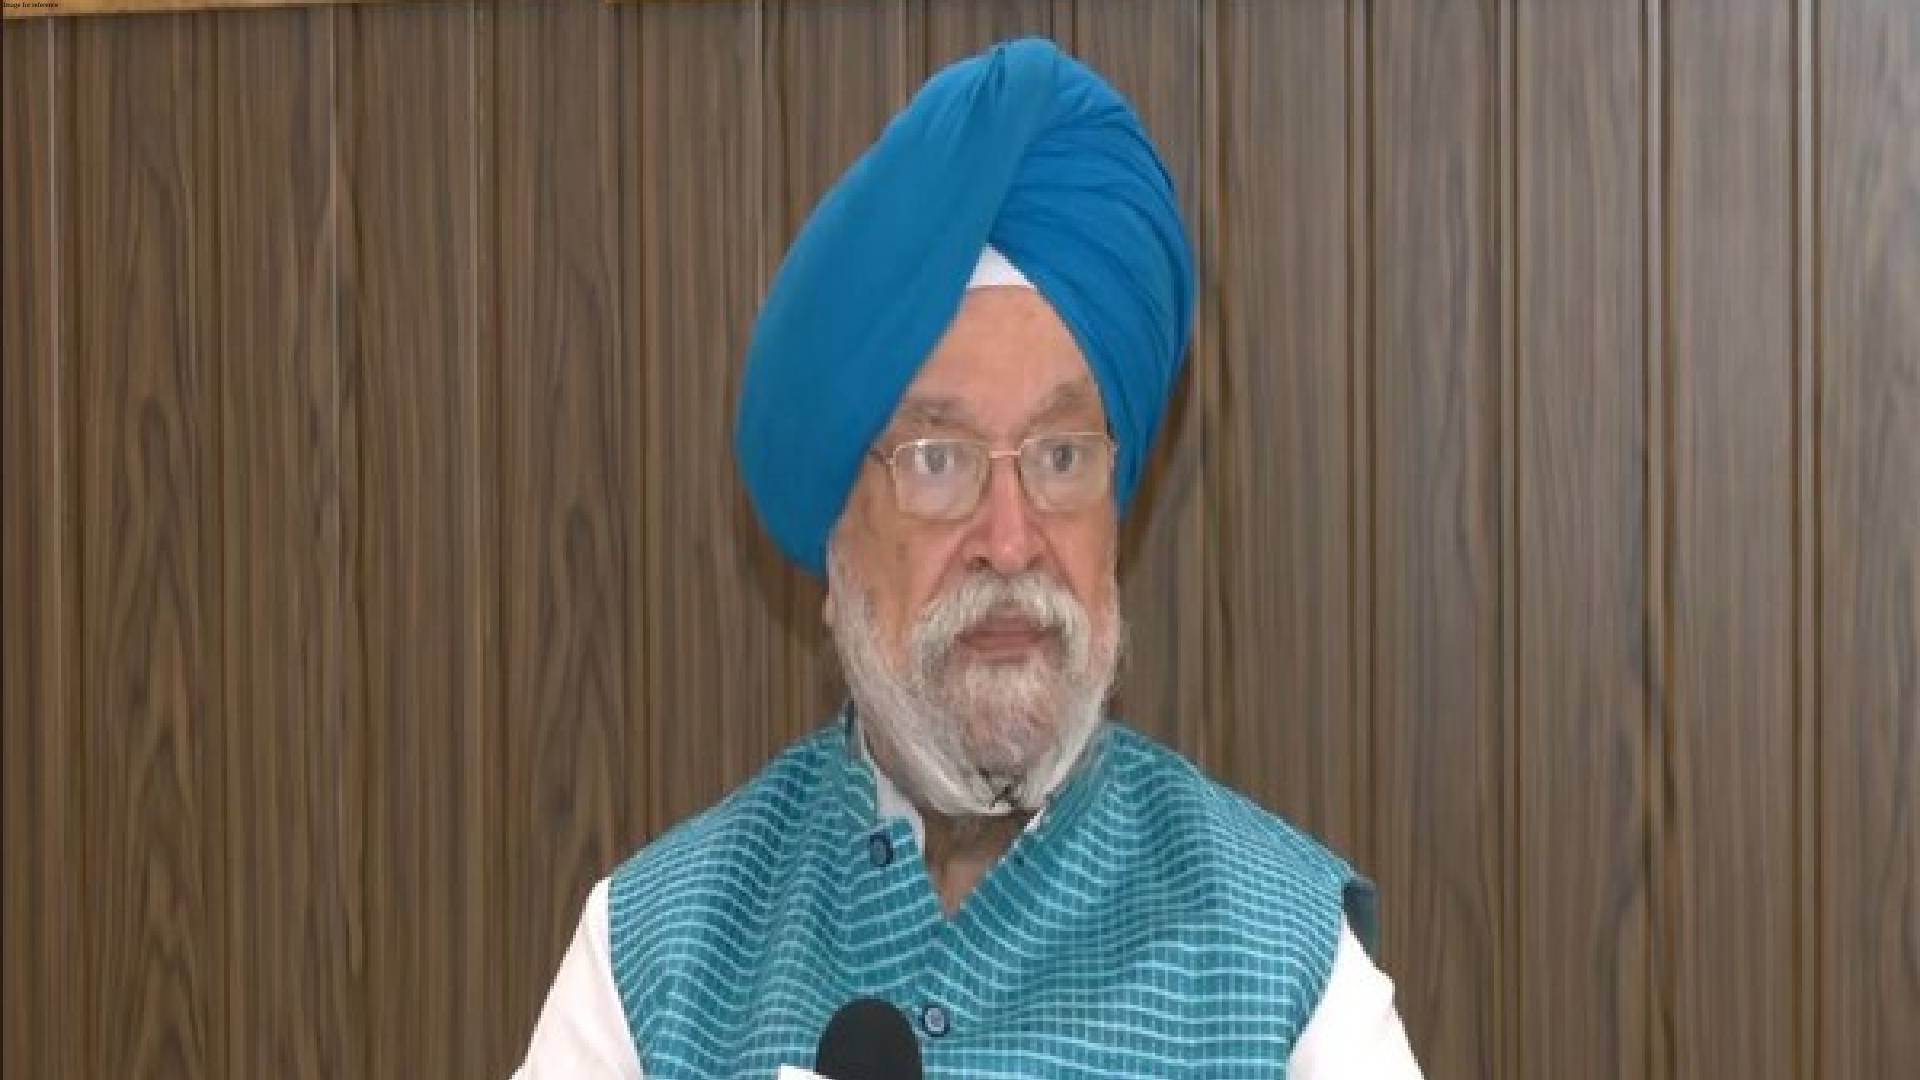 Aadhar authentication for LPG is being done to check bogus customers: Hardeep Singh Puri